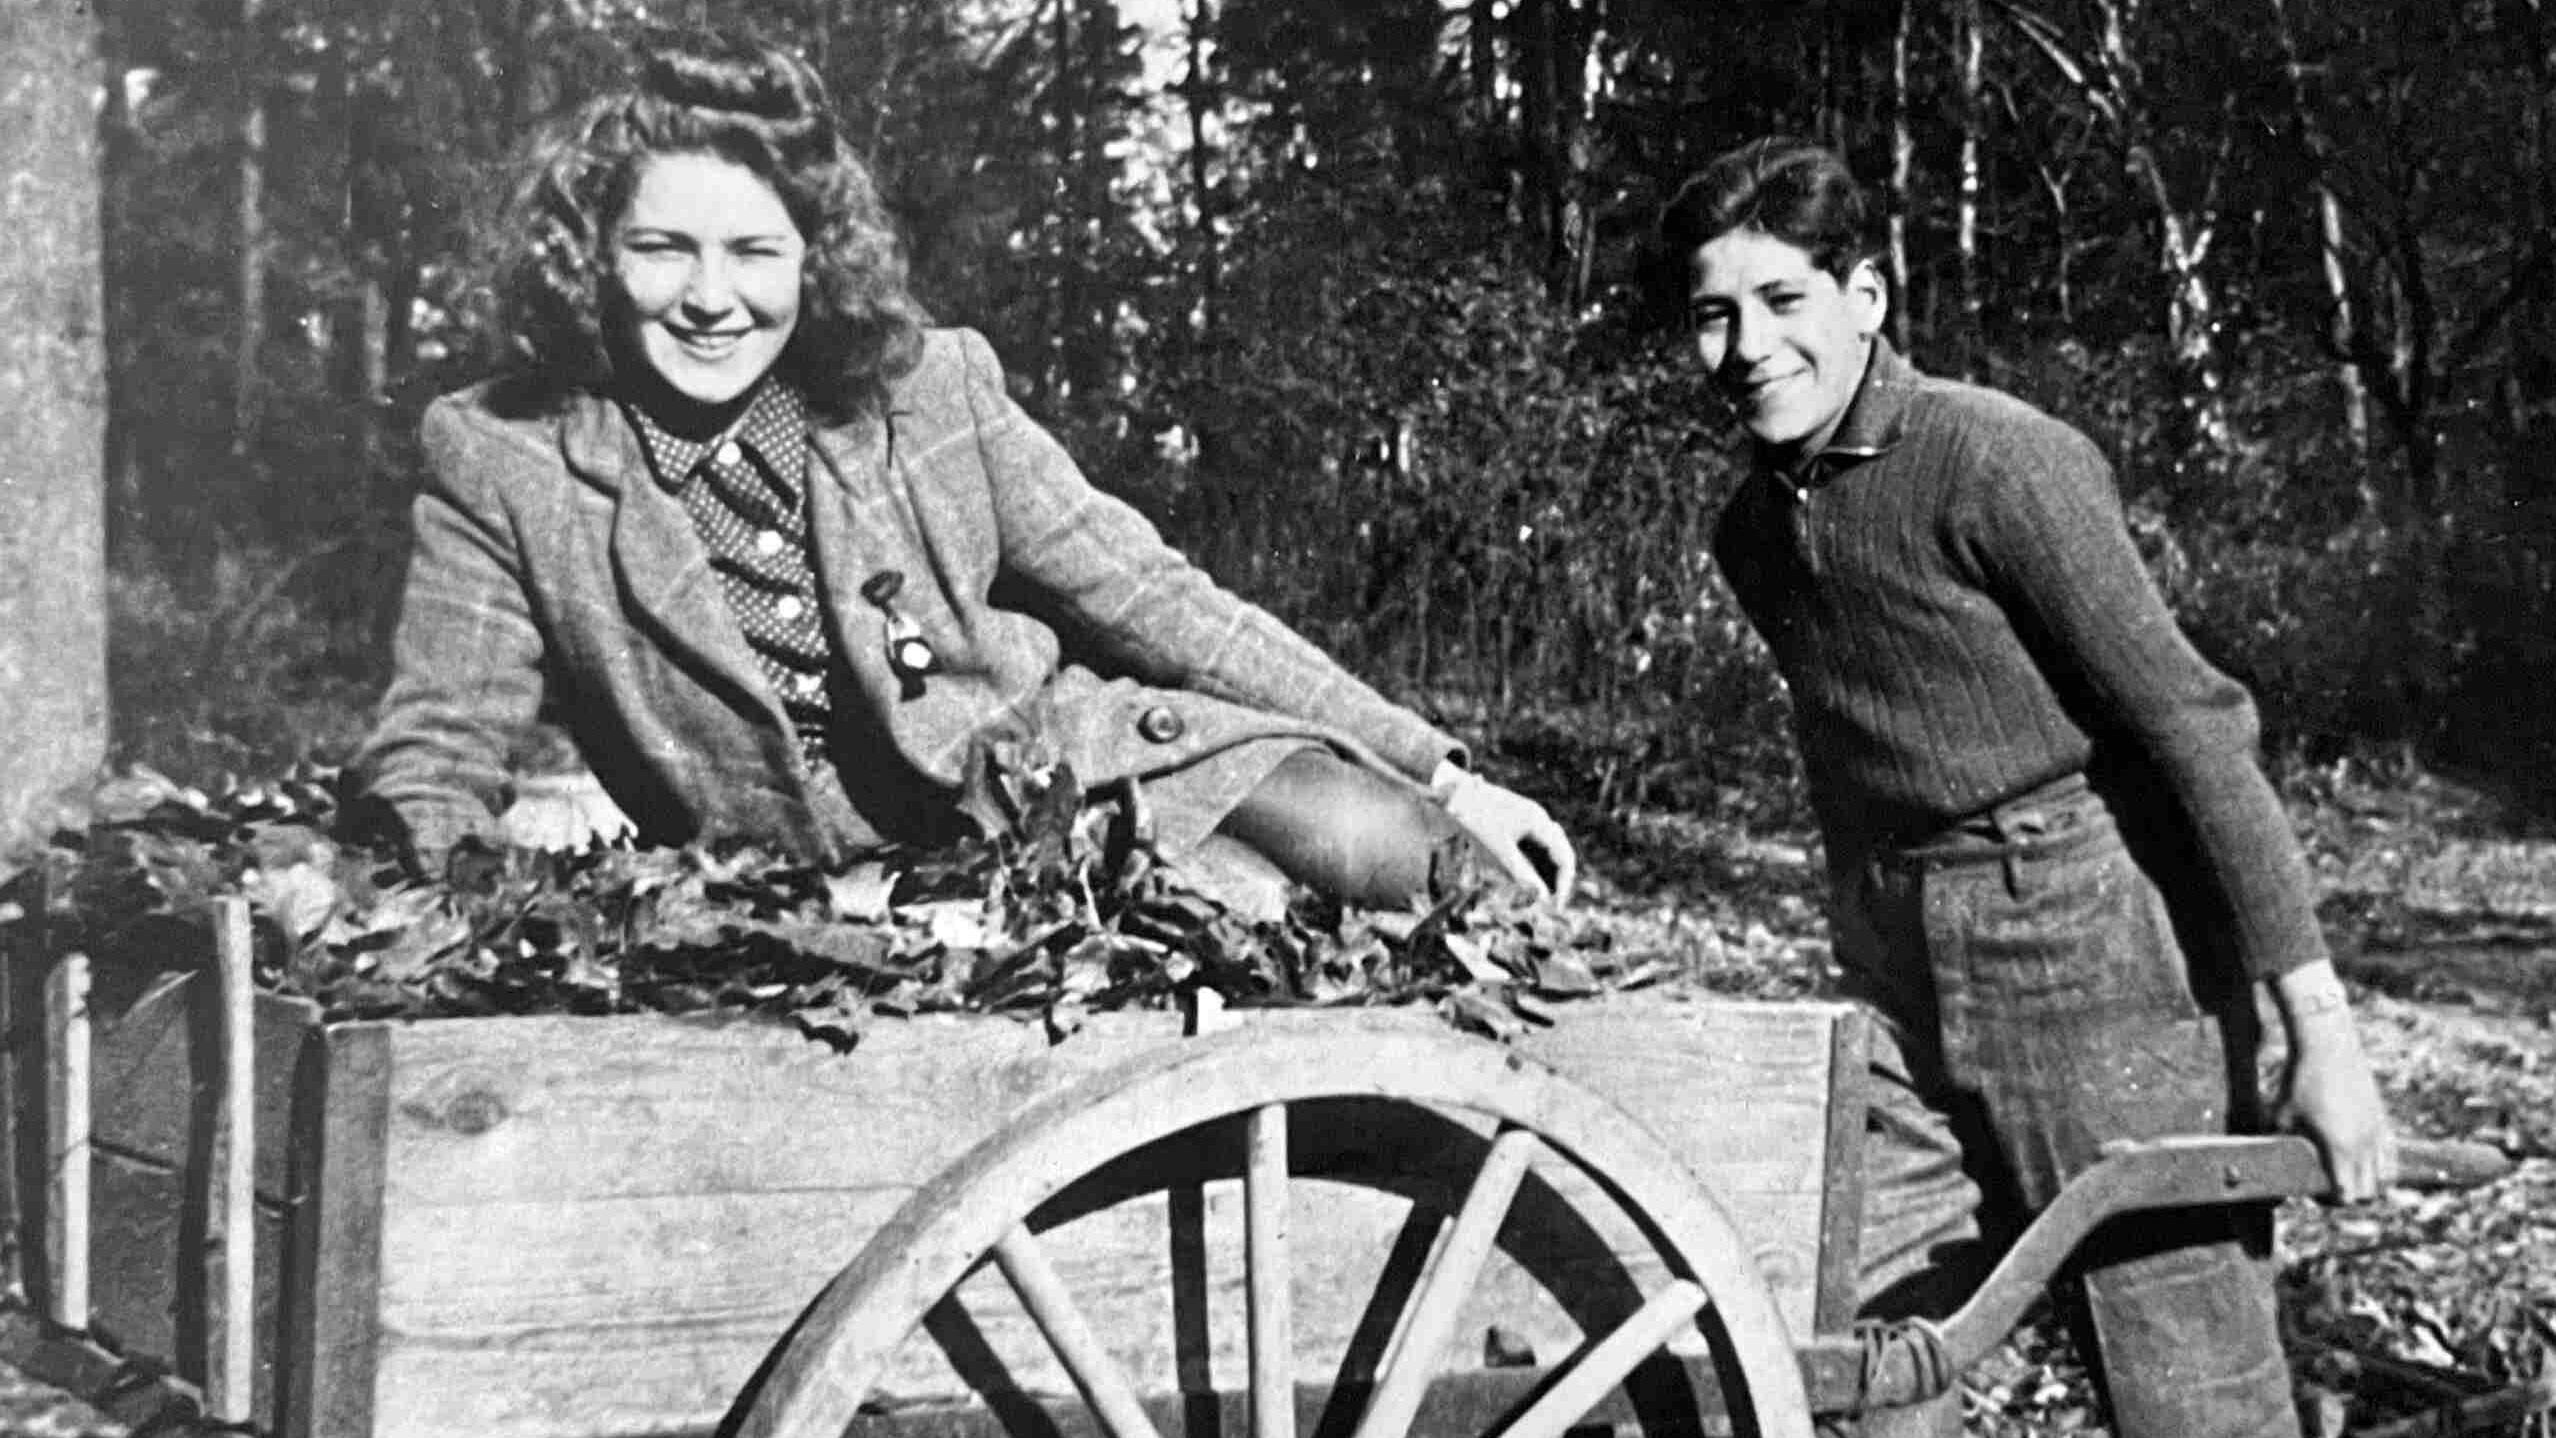 A black-and-white photograph of a yougng woman sitting in a wheel barrow being pushed by a young man.